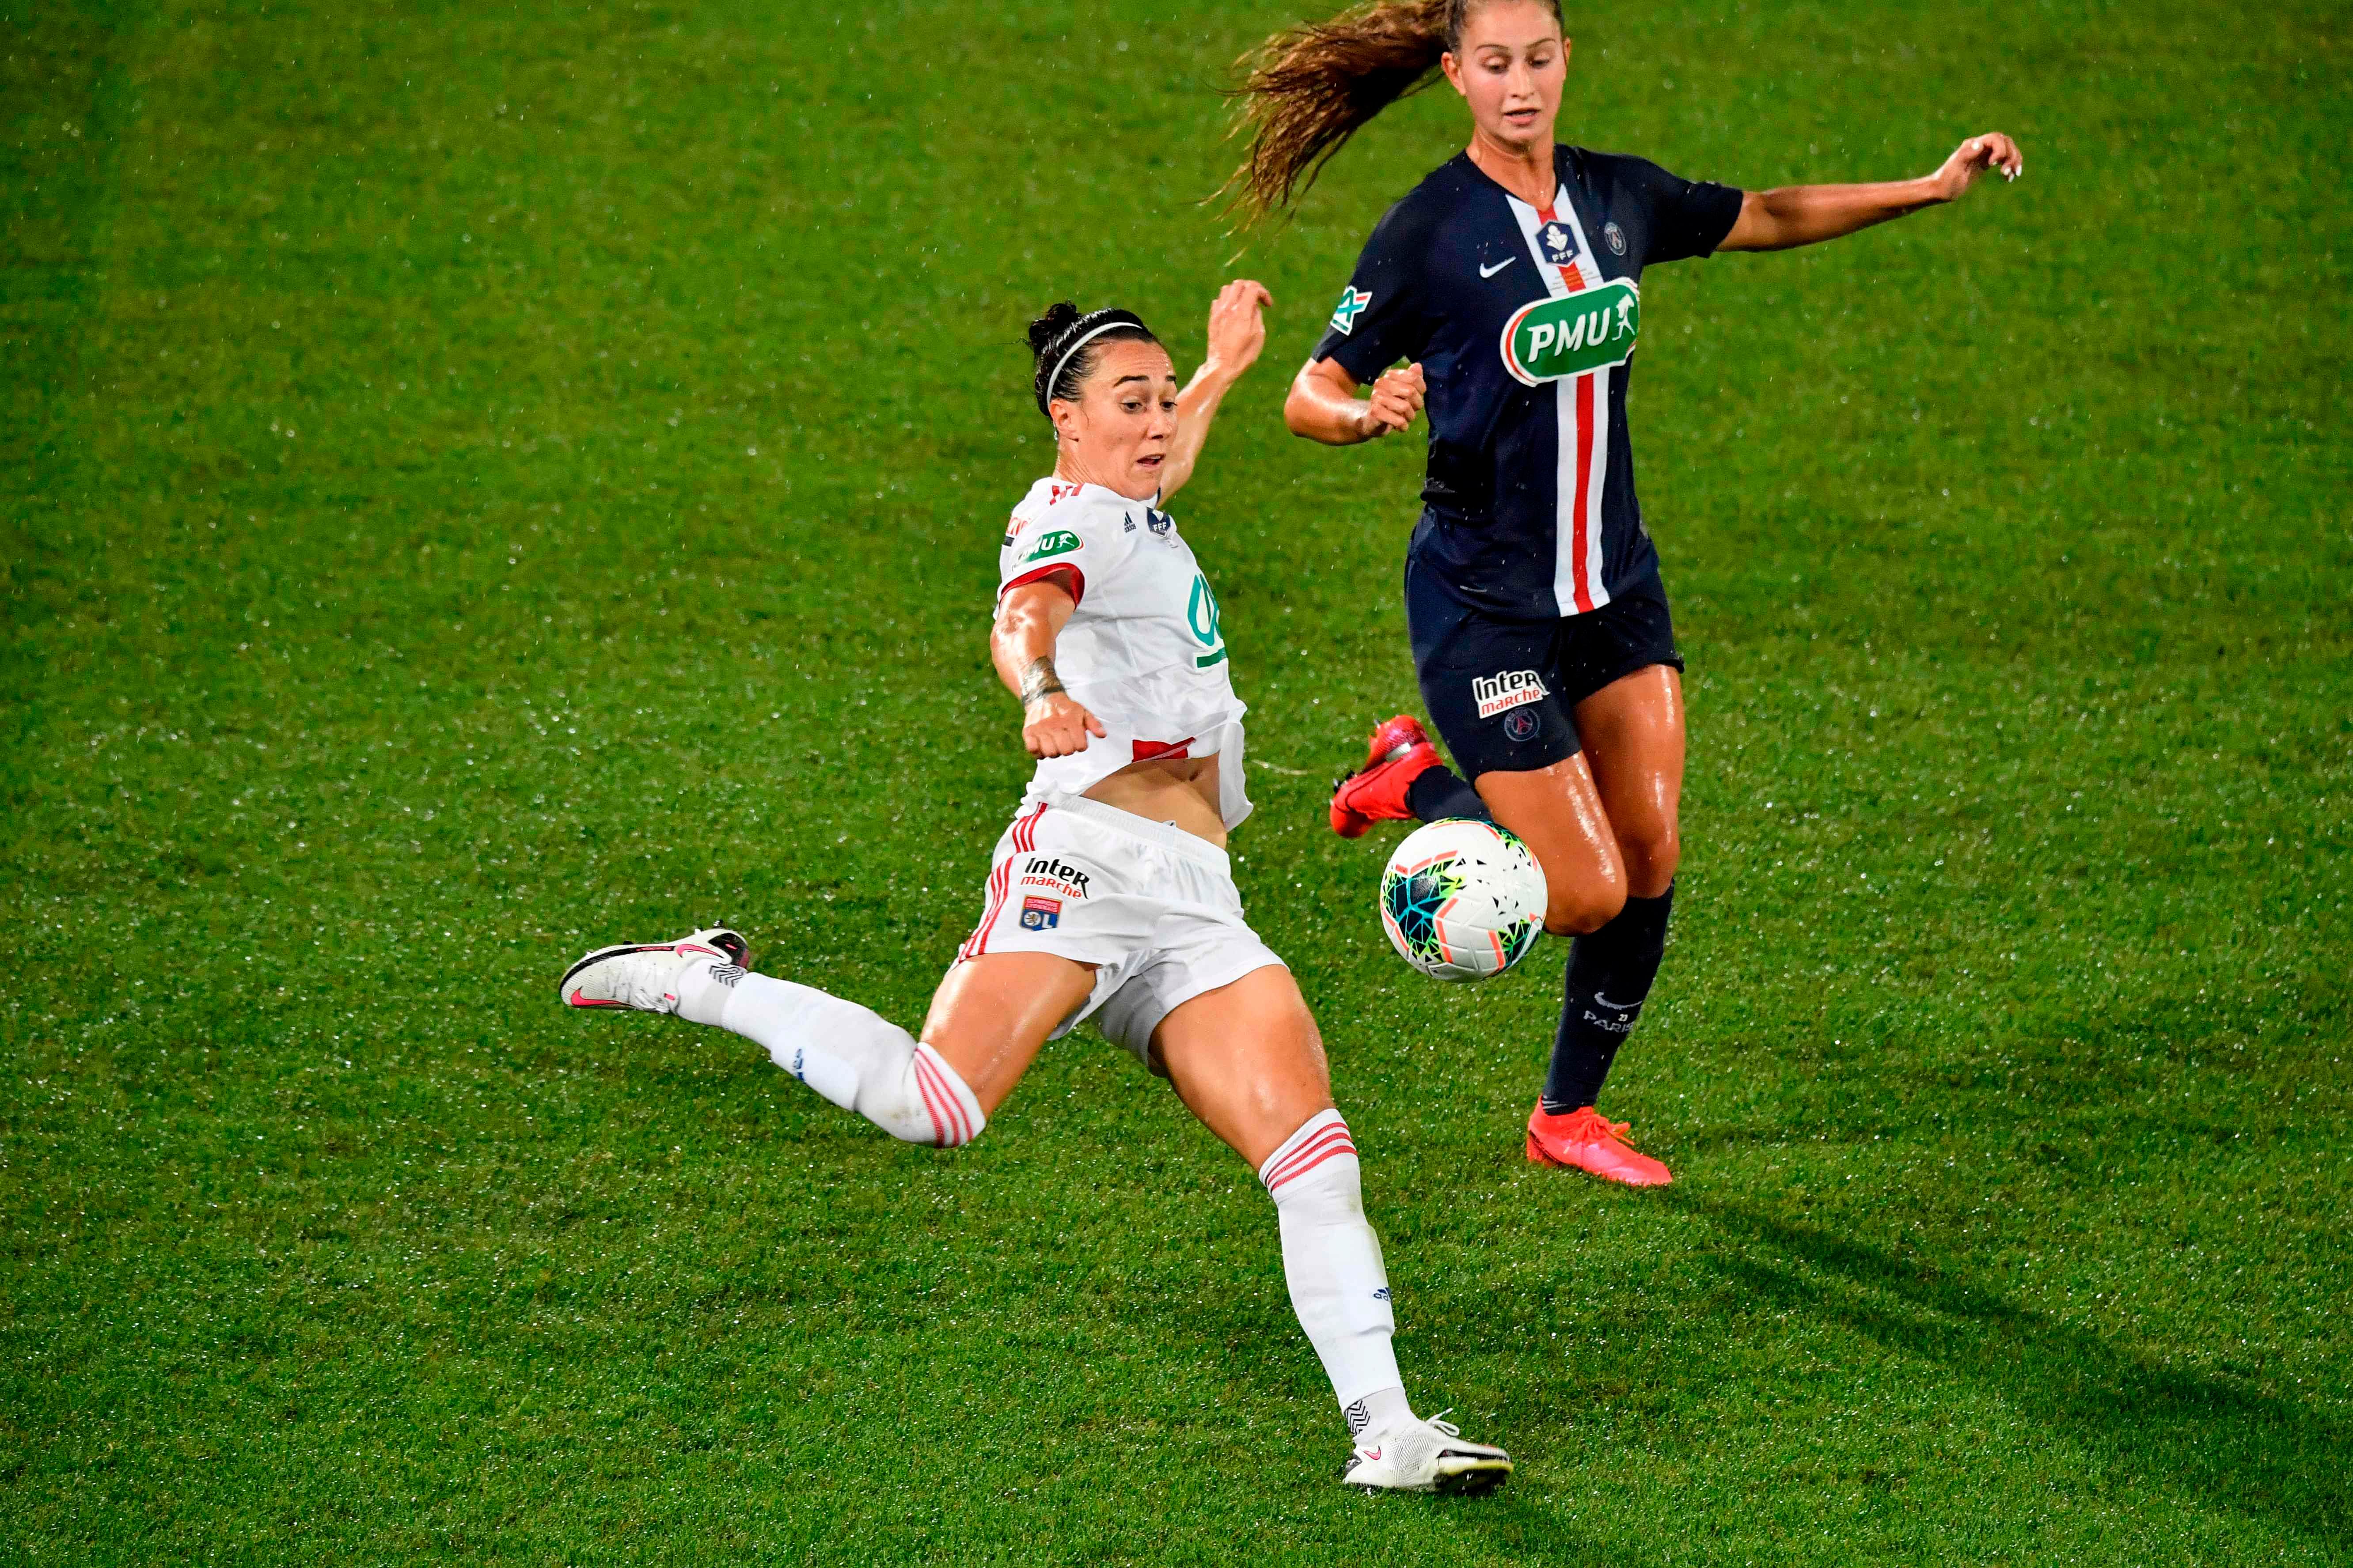 This file photo taken on August 9, 2020 shows Olympique Lyonnais's British defender Lucy Bronze (C) kicking the ball next to Paris Saint-Germain's Canadian forward Jordyn Huitema (R) during the French Cup final football match between Olympique Lyonnais (OL) and Paris Saint-Germain (PSG) at the Abbe-Deschamps stadium in Auxerre. - England defender Lucy Bronze was named best women's player of the year during FIFA's 'The Best' awards ceremony on December 17, 2020, succeeding last year's winner Megan Rapinoe. The 29-year-old Manchester City defender, who won the Champions League with Lyon in August, carried off the award ahead of her former Lyon teammate Wendie Renard, and striker Pernille Harder, who moved from Wolfsburg to Chelsea in early September. Credit: AFP File Photo